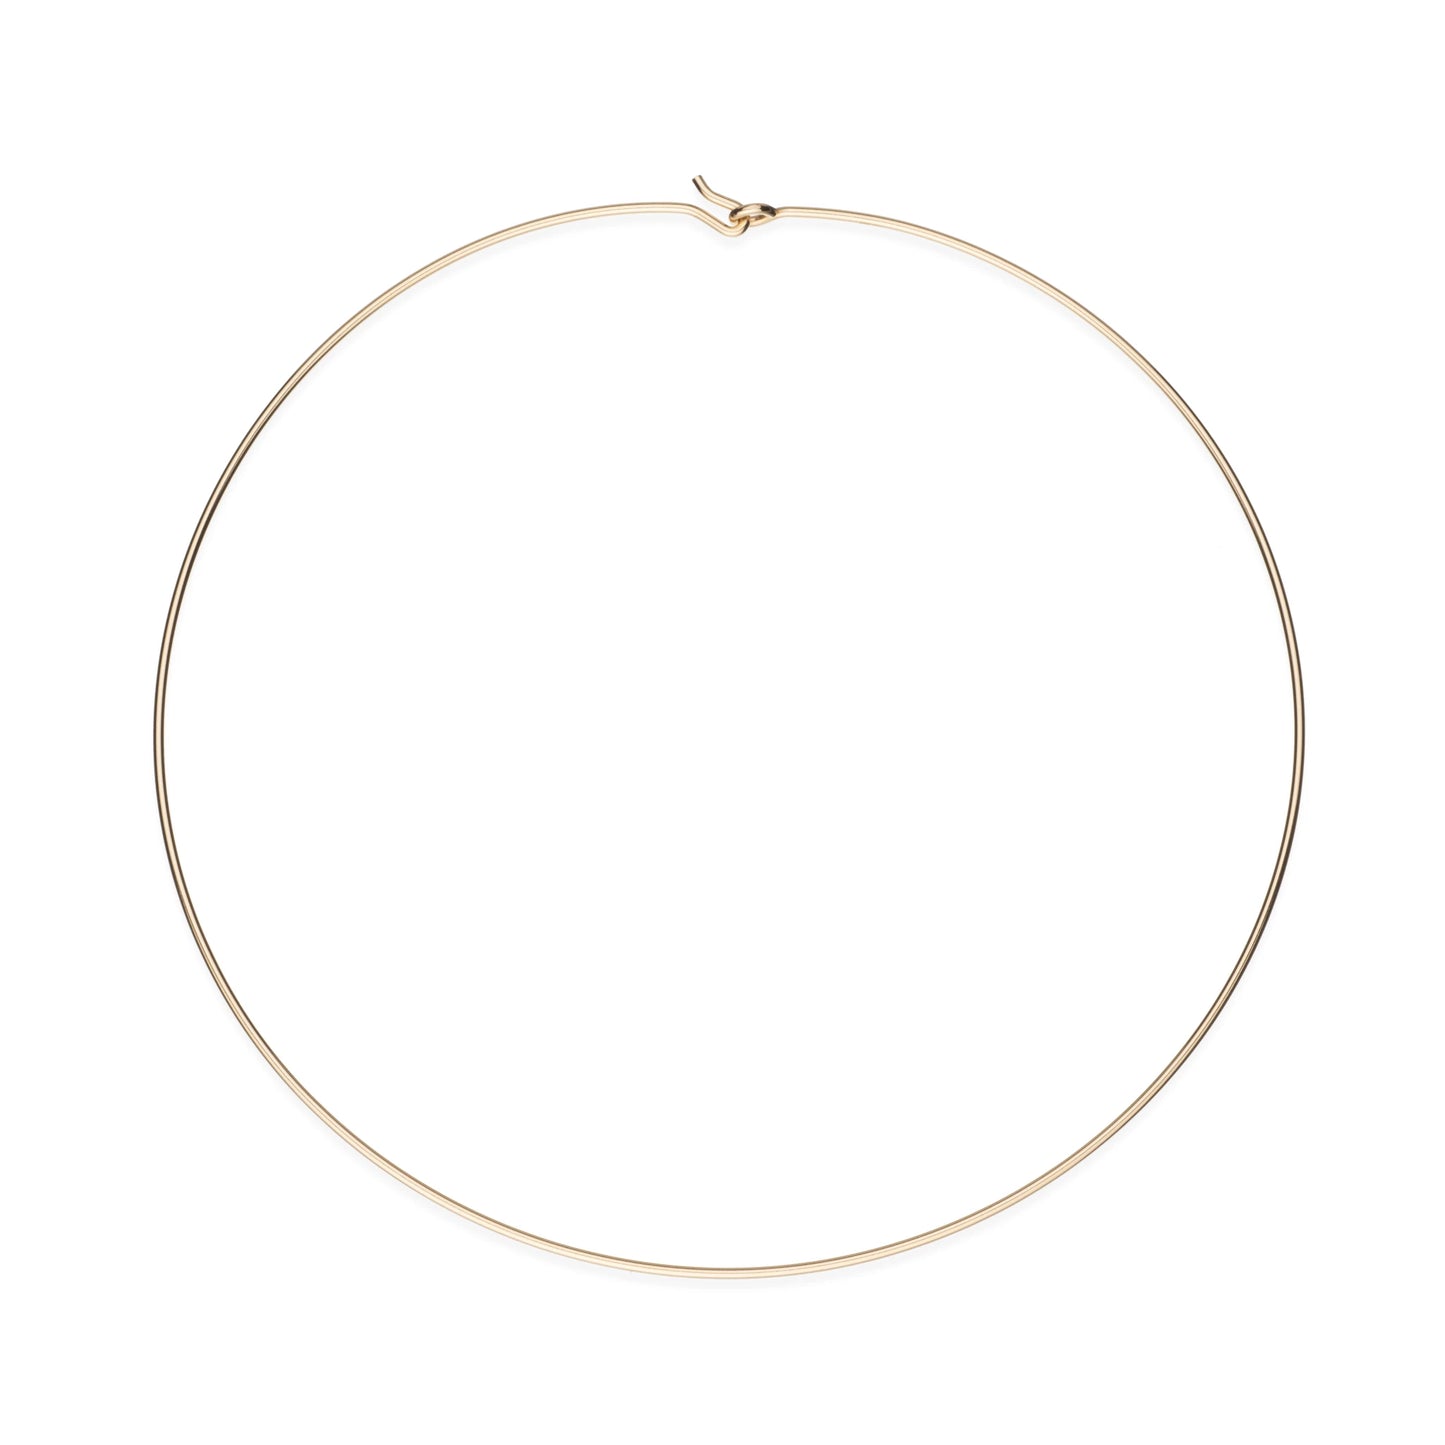 Essential Collar Necklace - 9kt gold